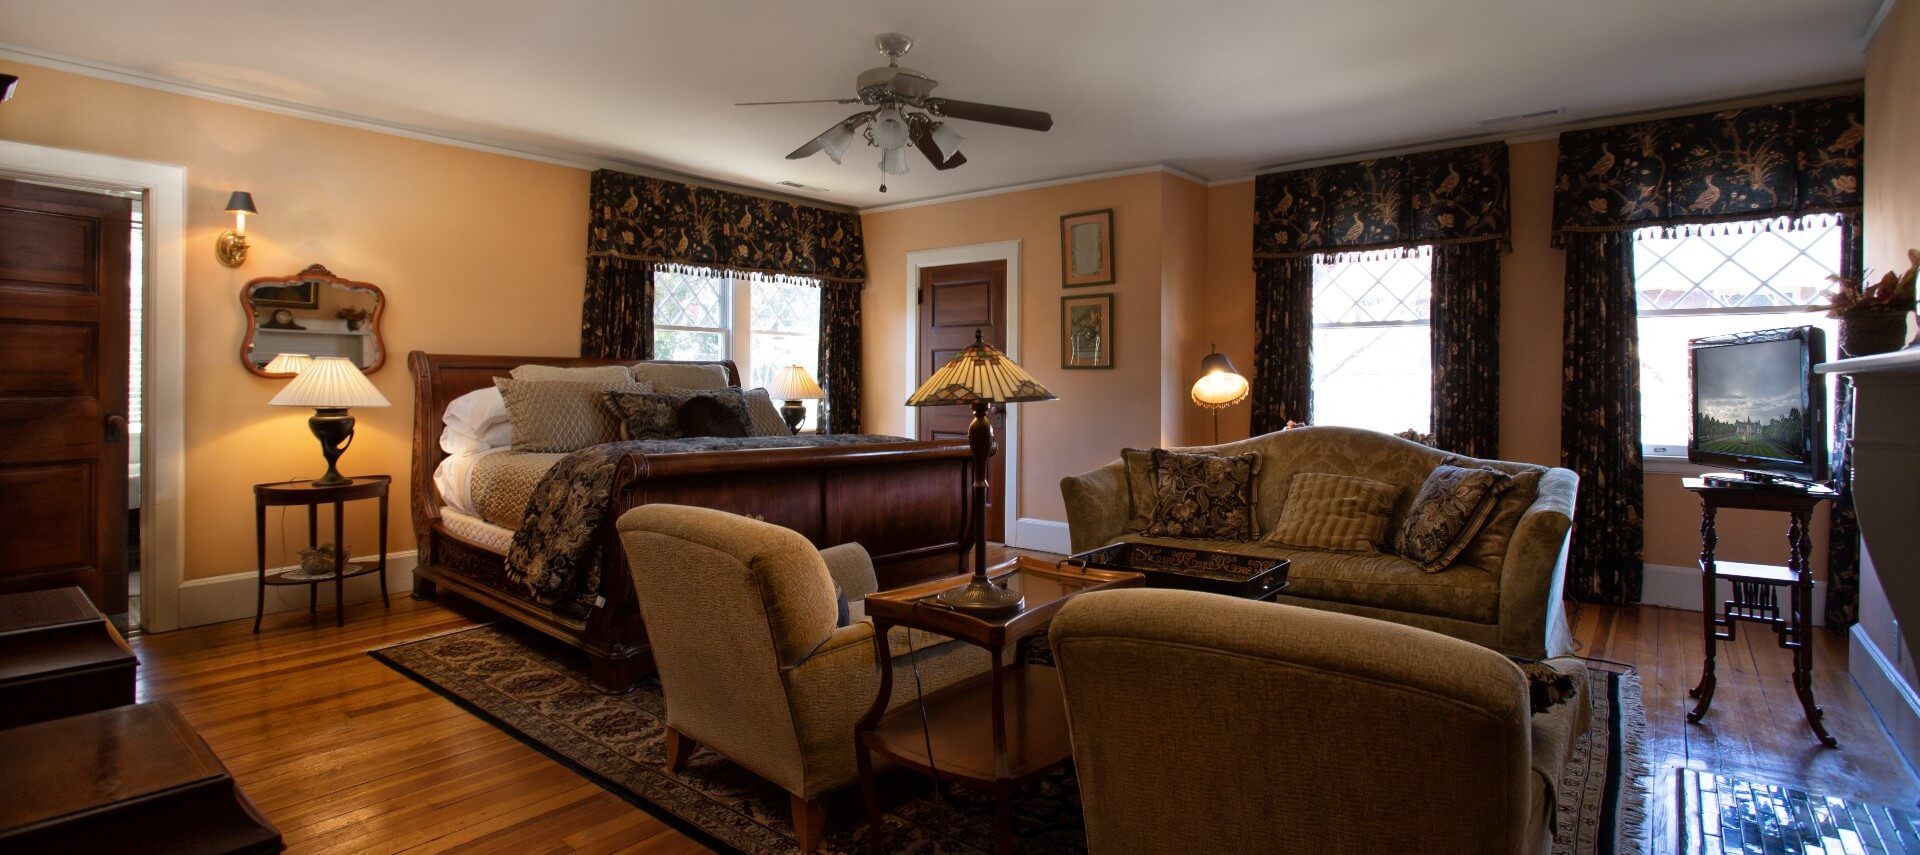 Spacious guest room with magnificent king-size sleigh bed and sitting area with a couch and two chairs